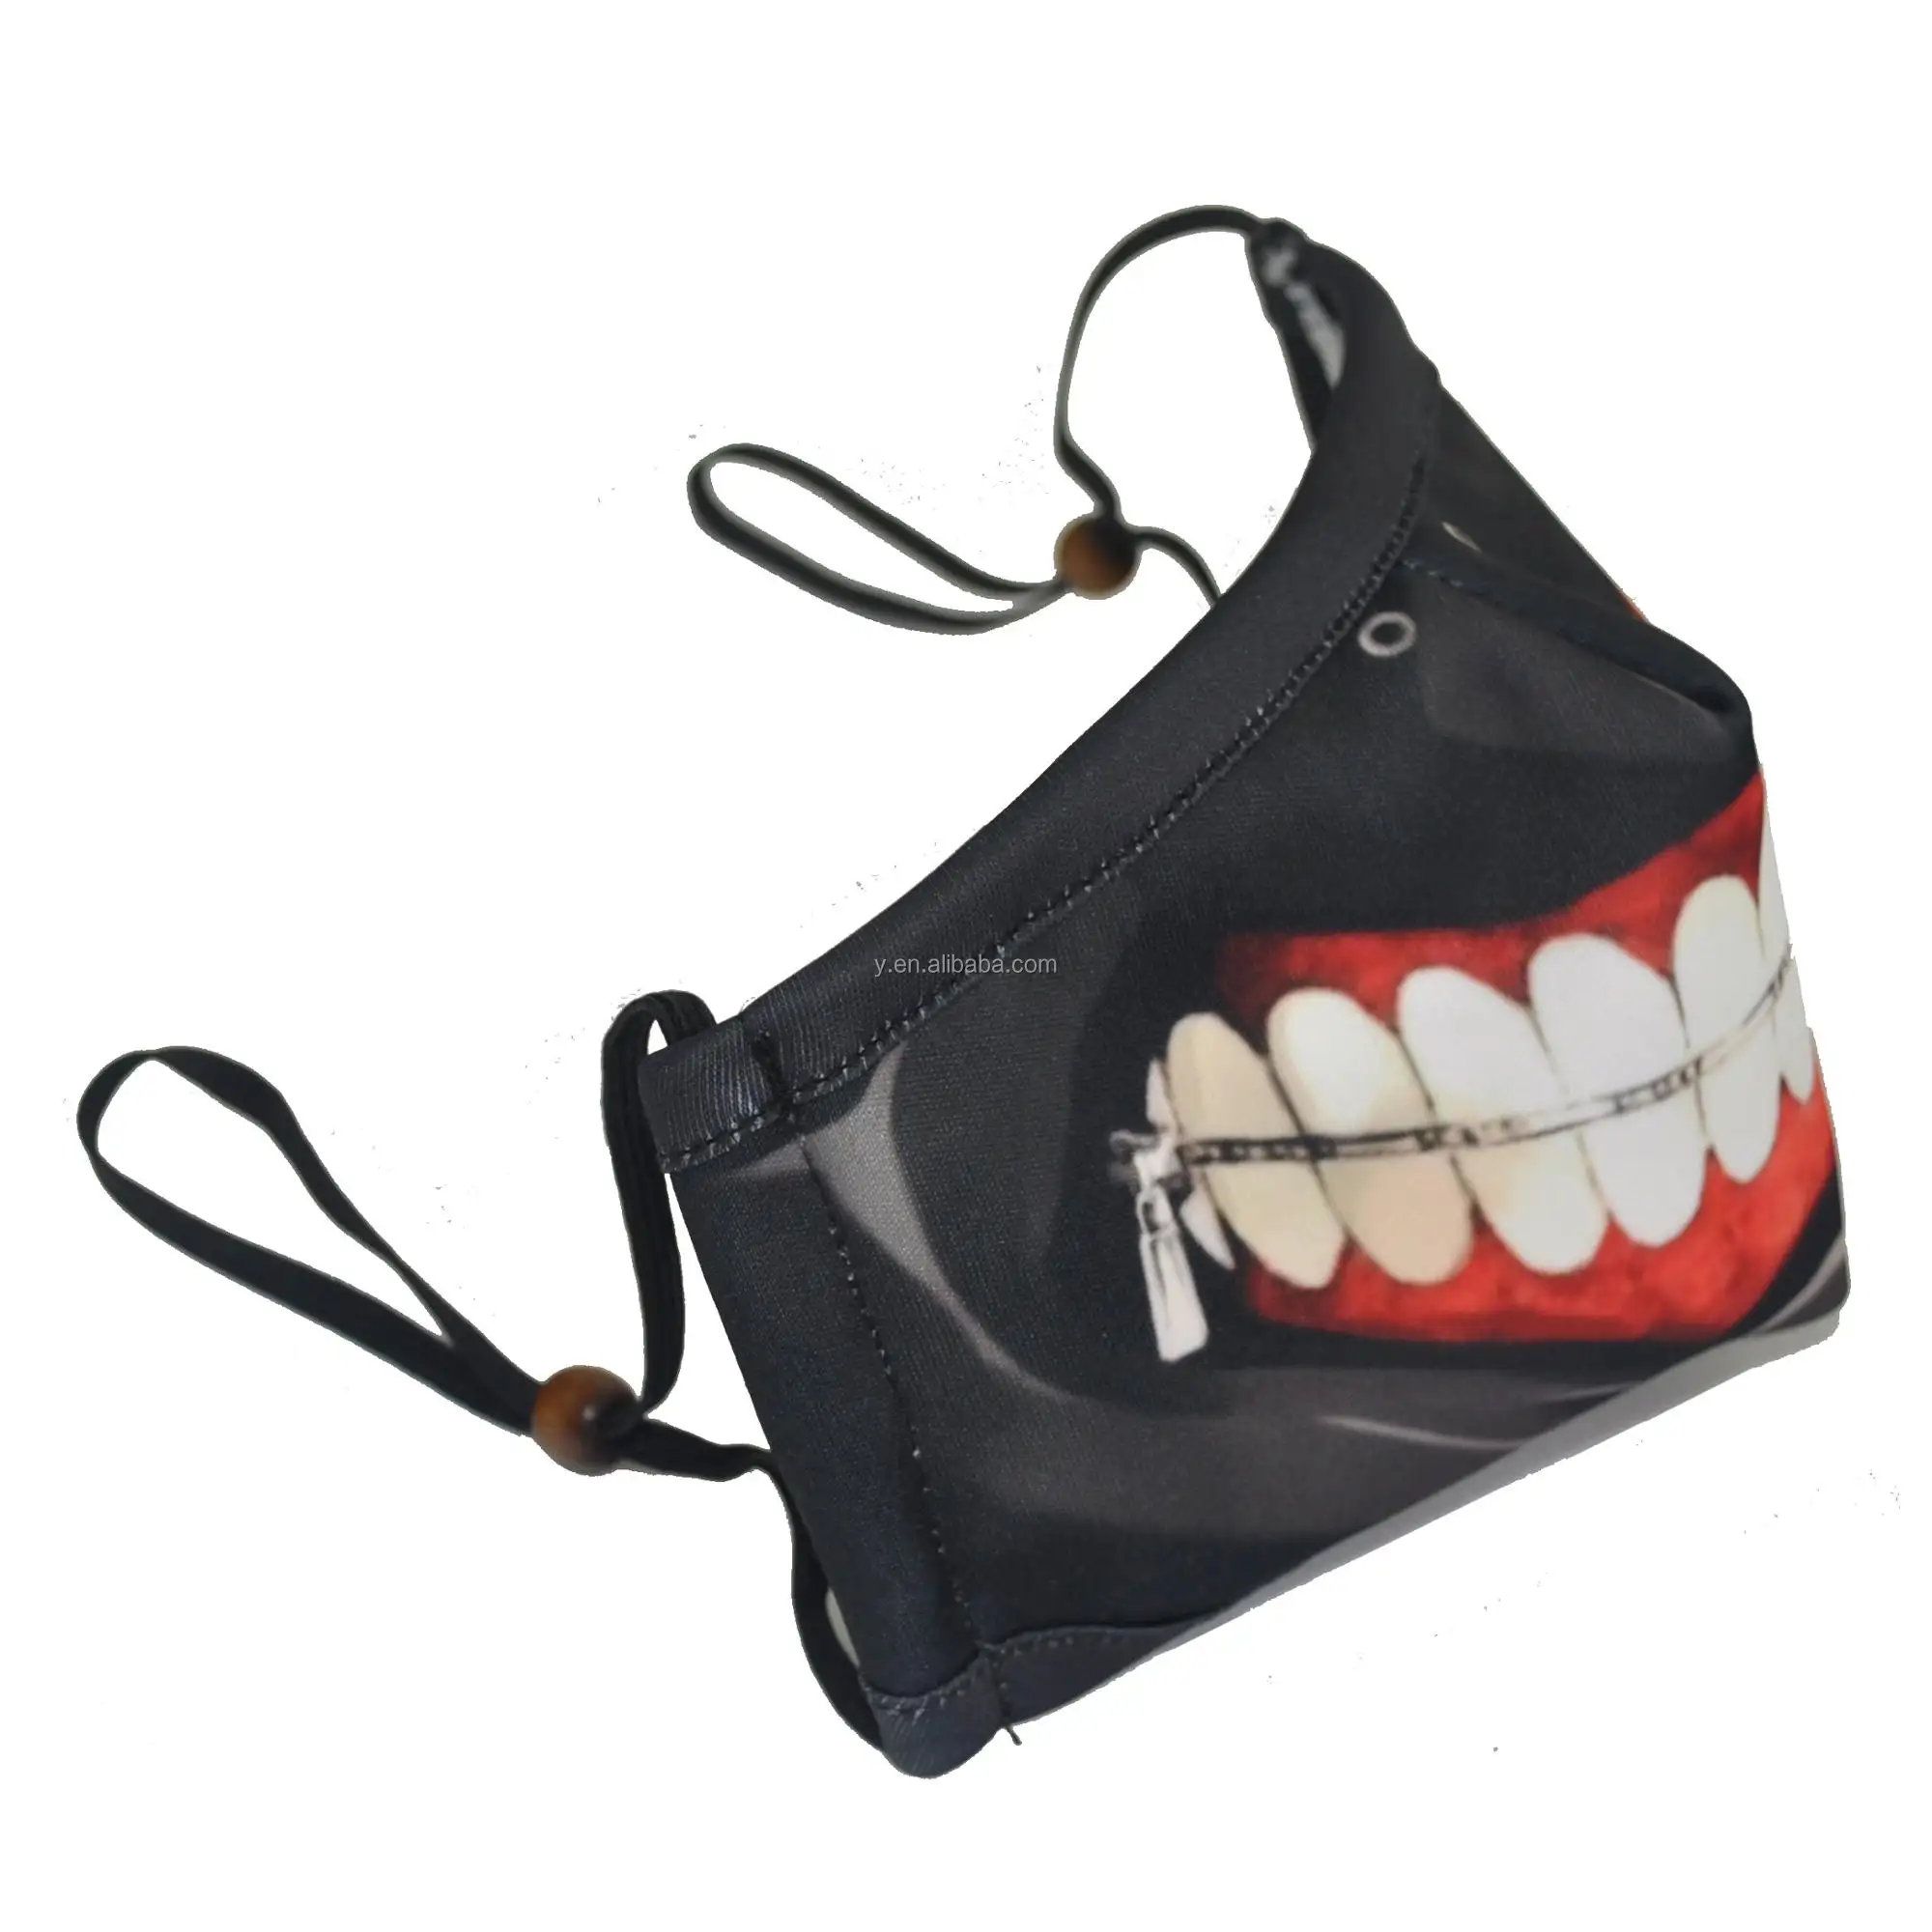 Anime Halloween Party Cosplay Custom Made Party Gunsten Horror Facemask